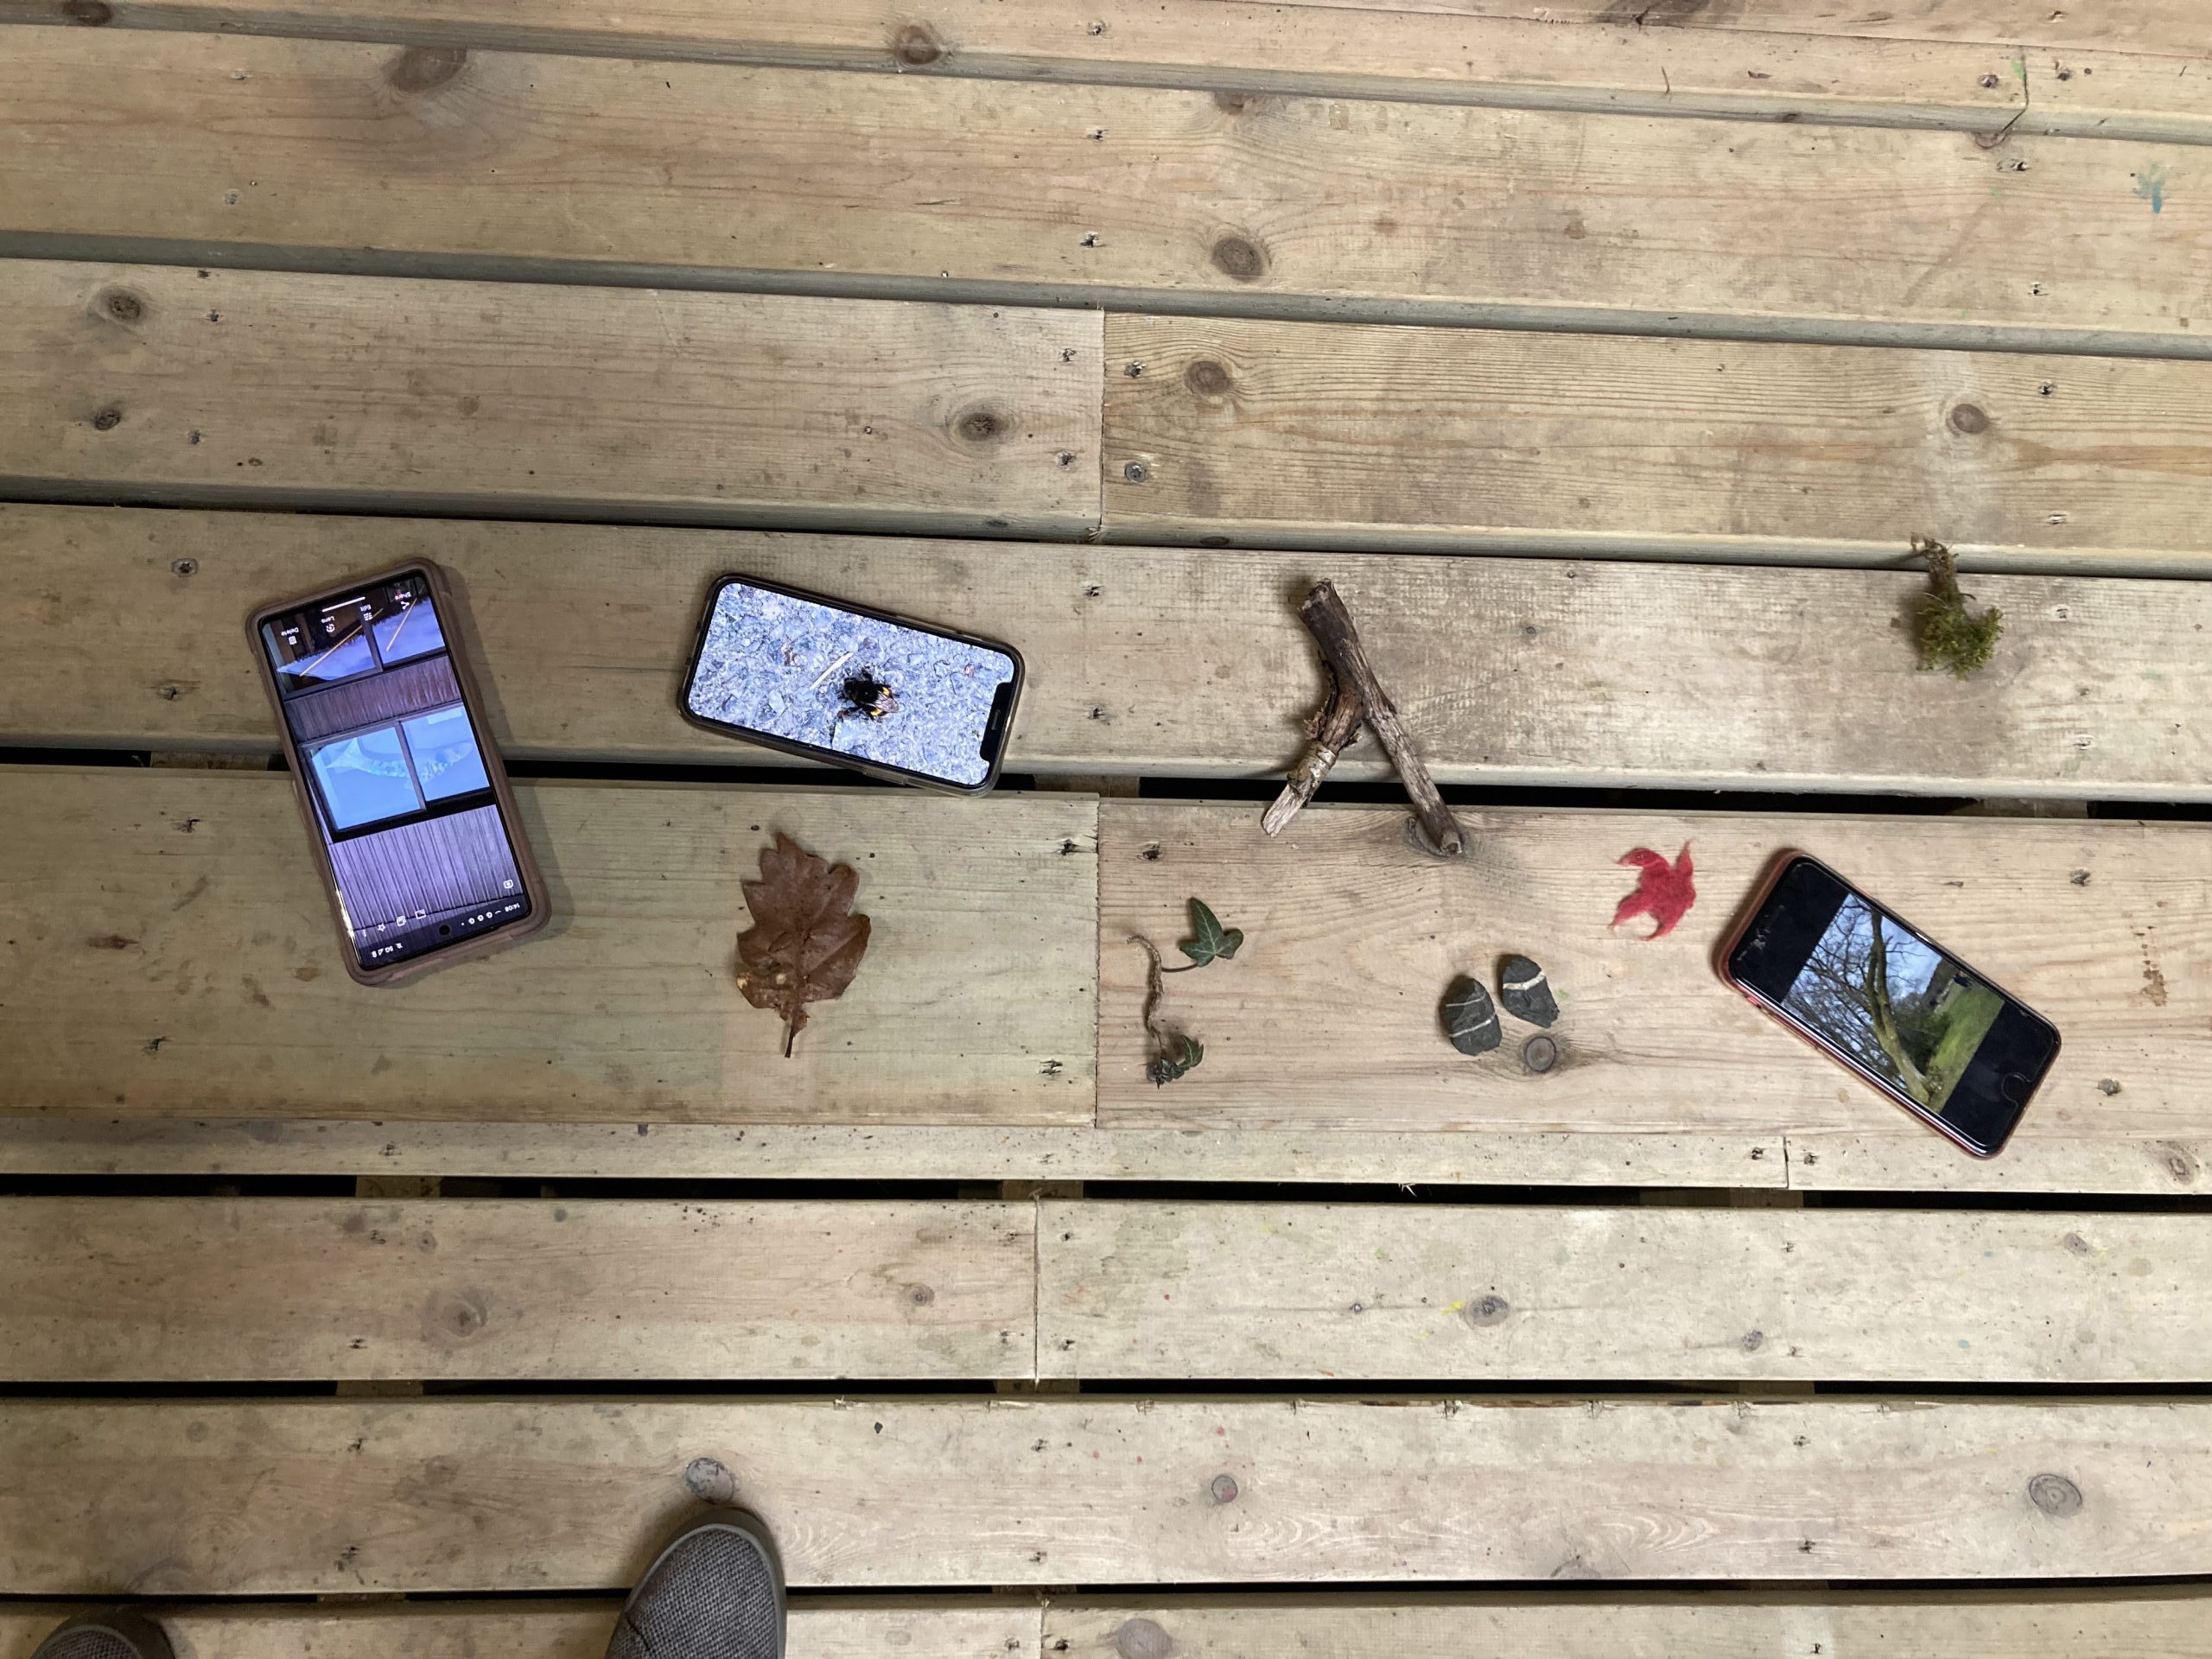 An image capturing phones, with there screens on, lay down on wooden plank flooring, alongside leaves and branches.